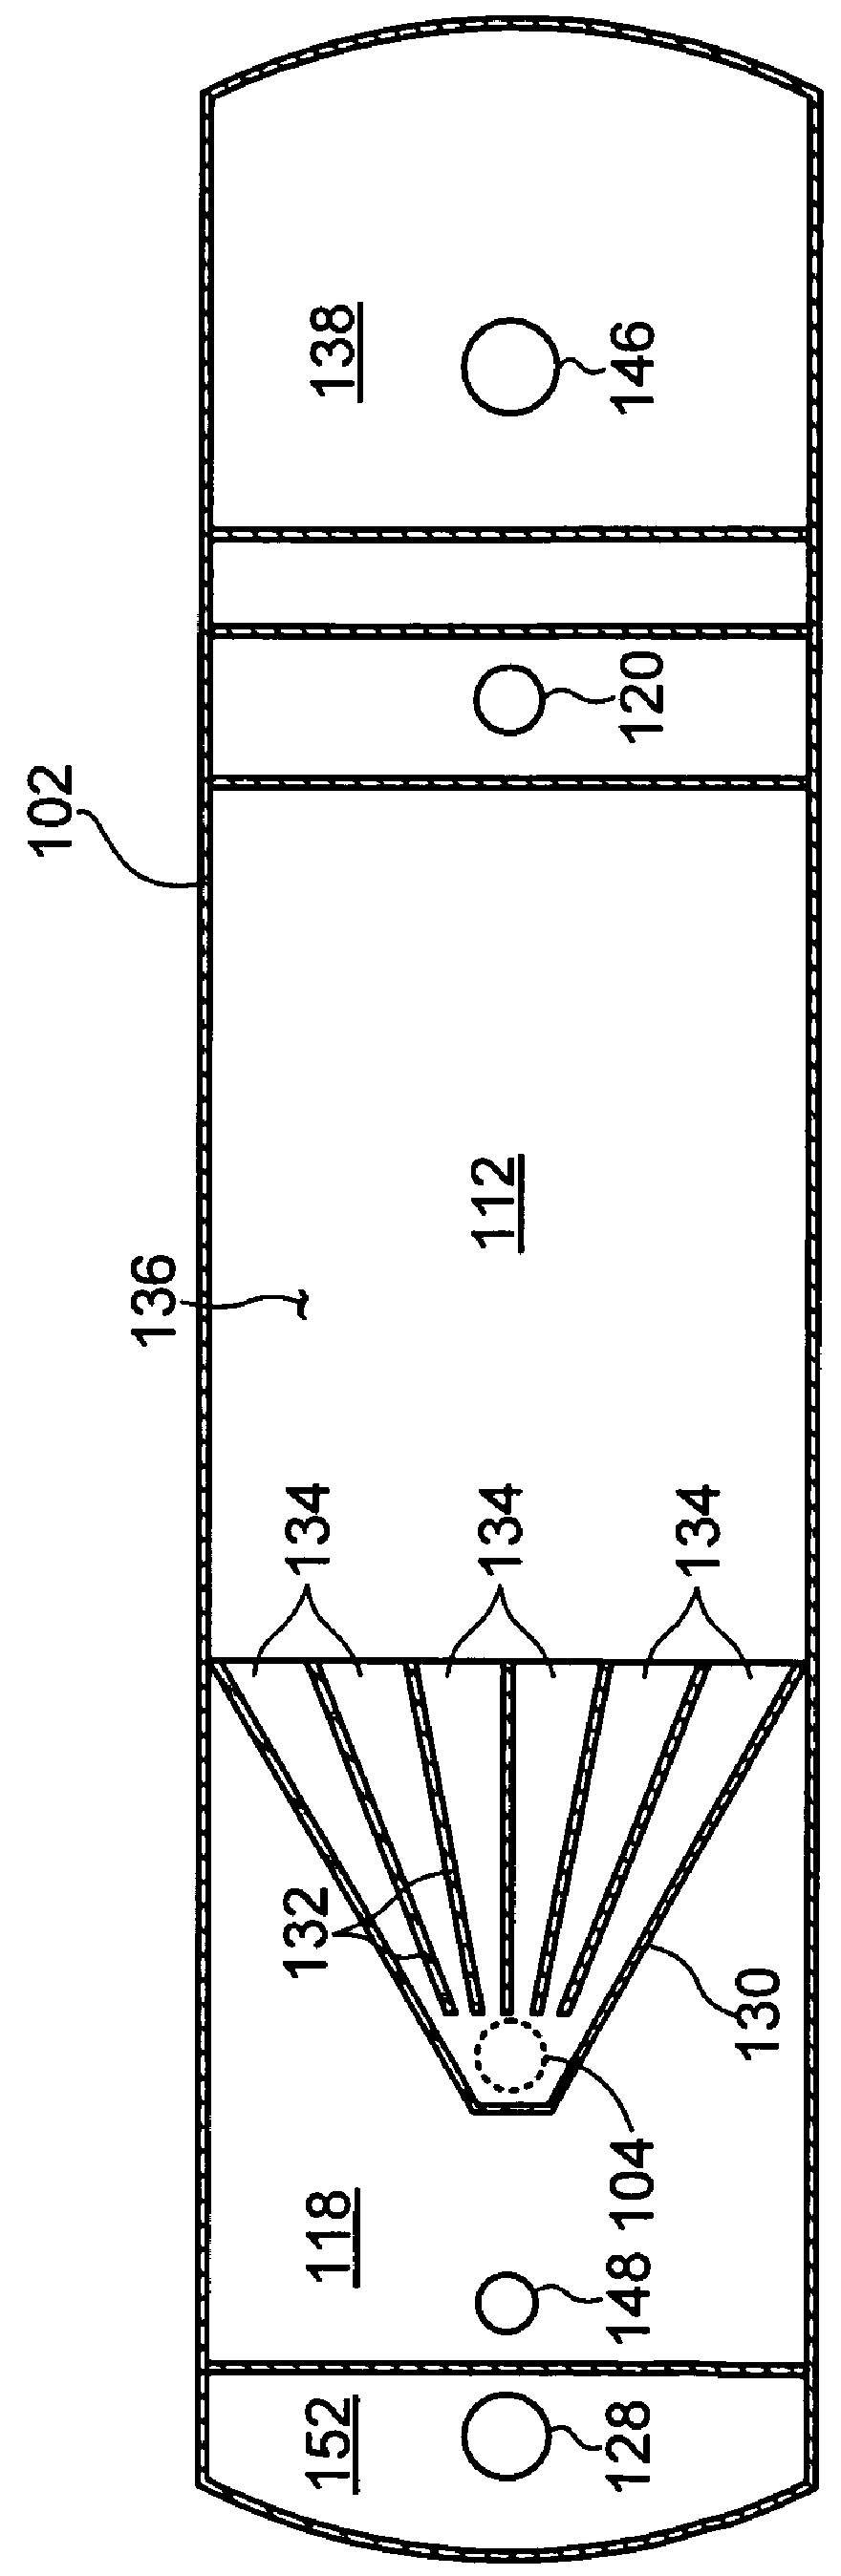 Process and apparatus for treating a heavy hydrocarbon feedstock